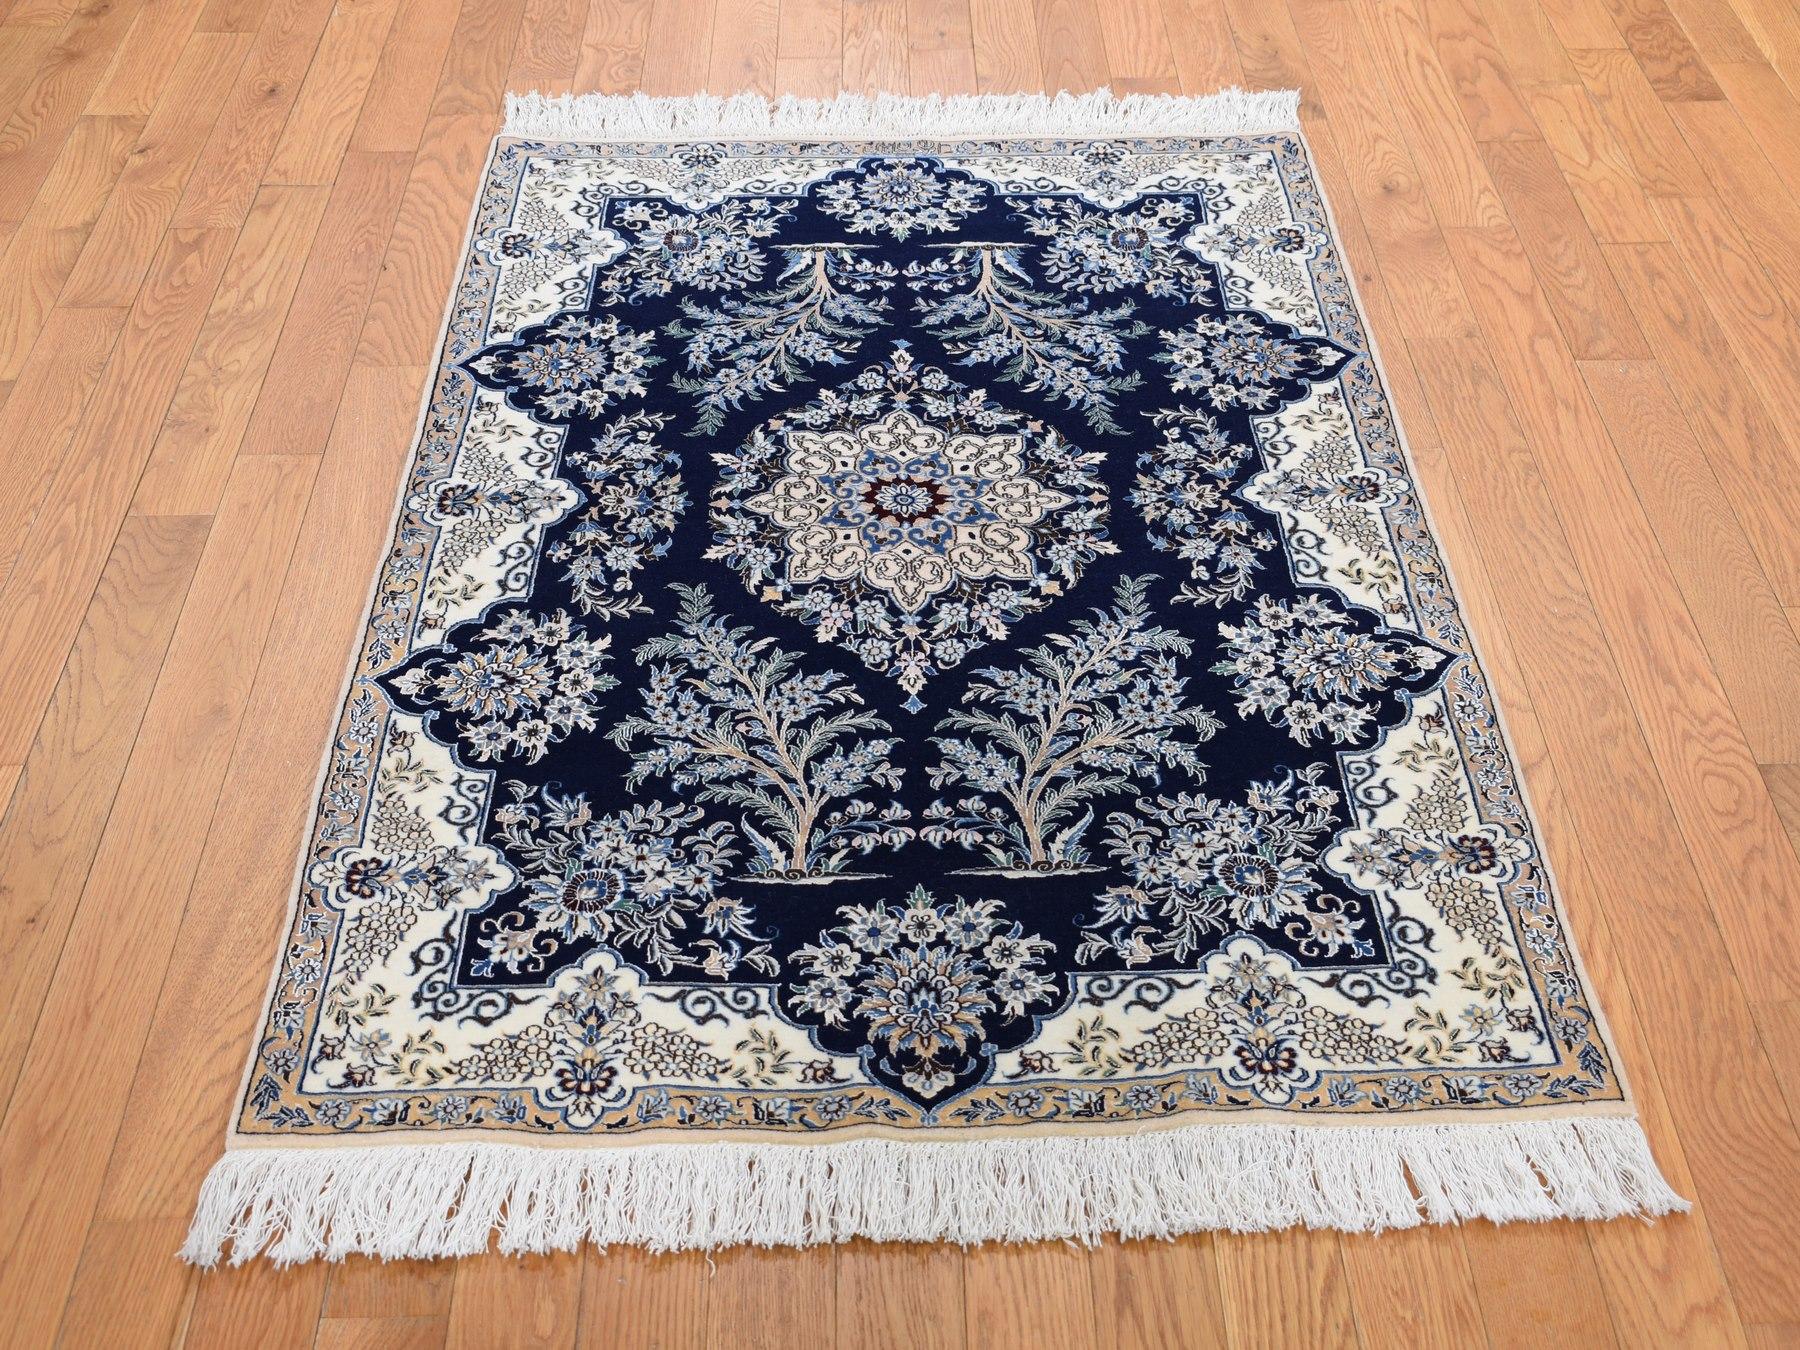 This is a truly genuine one-of-a-kind wool and silk Navy blue Persian Nain 400 KPSI Signed Habibian rug. It has been knotted for months and months in the centuries-old Persian weaving craftsmanship techniques by expert artisans.

Primary